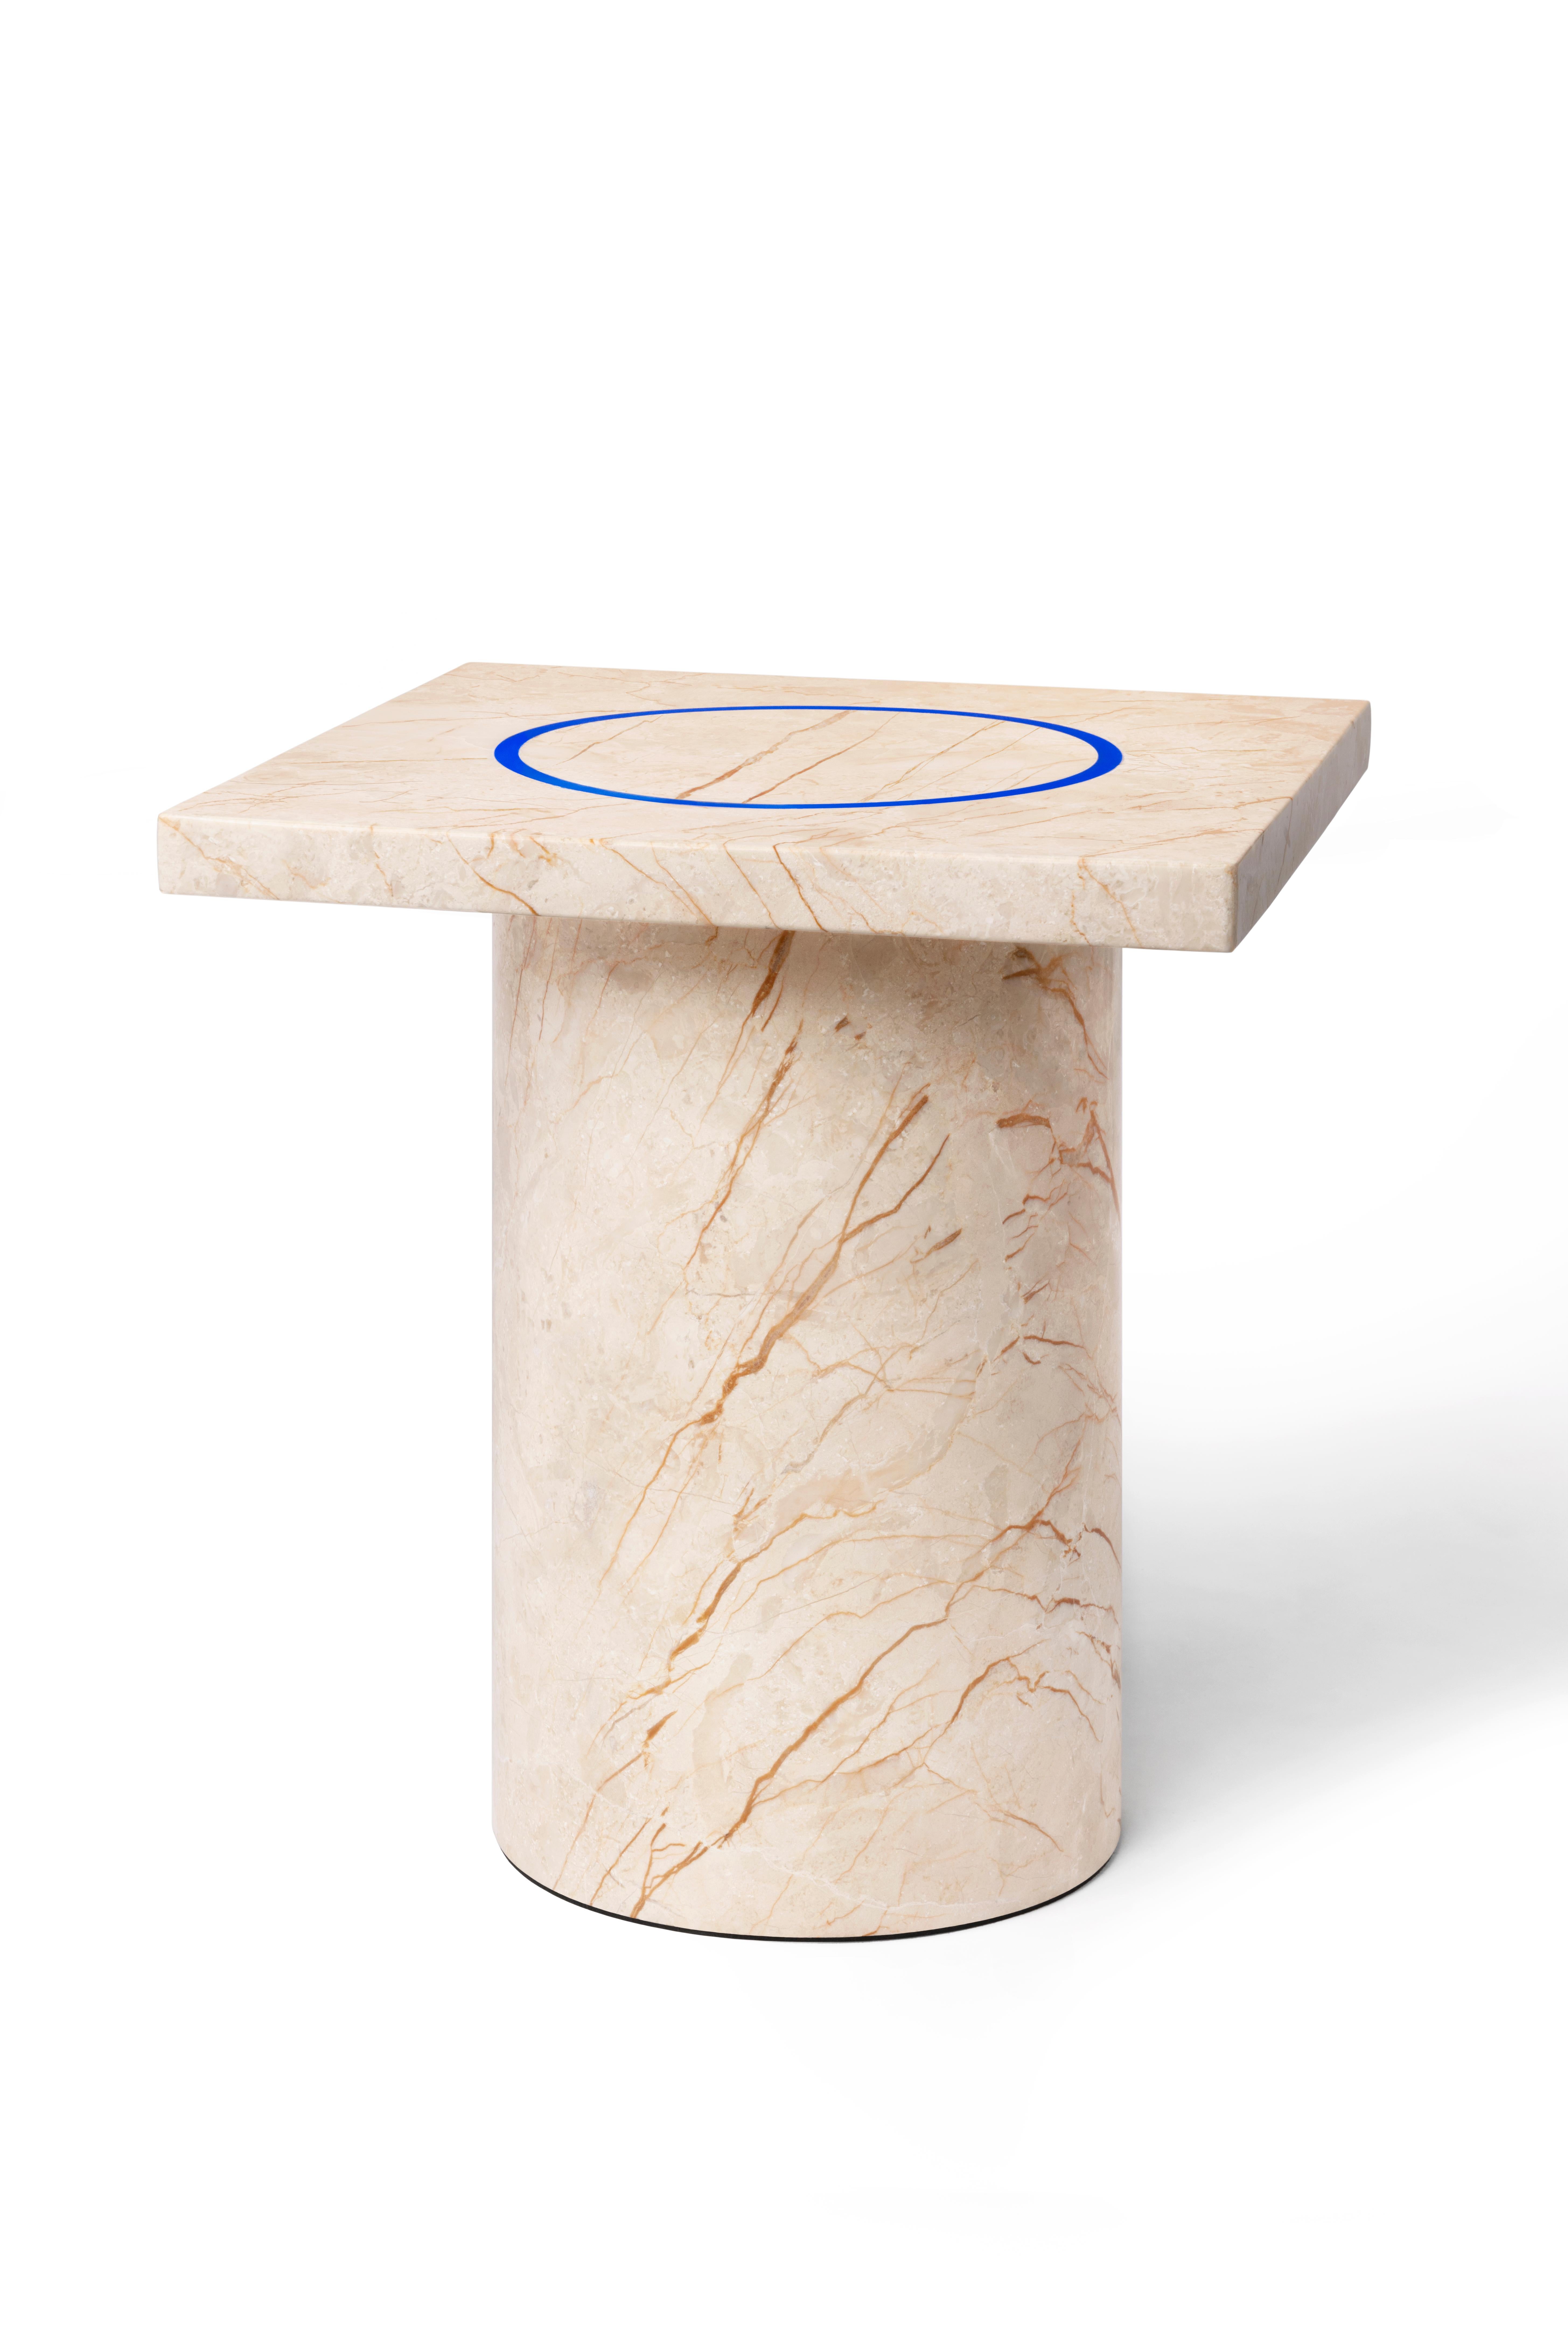 'DISLOCATION' collection by Buzao, small table
Golden Sunset marble, blue acrylic
Measures: 40 x 40 x H 38 cm

Studio Buzao from Guangzhou (China) is exploring innovation with furniture and lighting design. From marble to lava stone, from